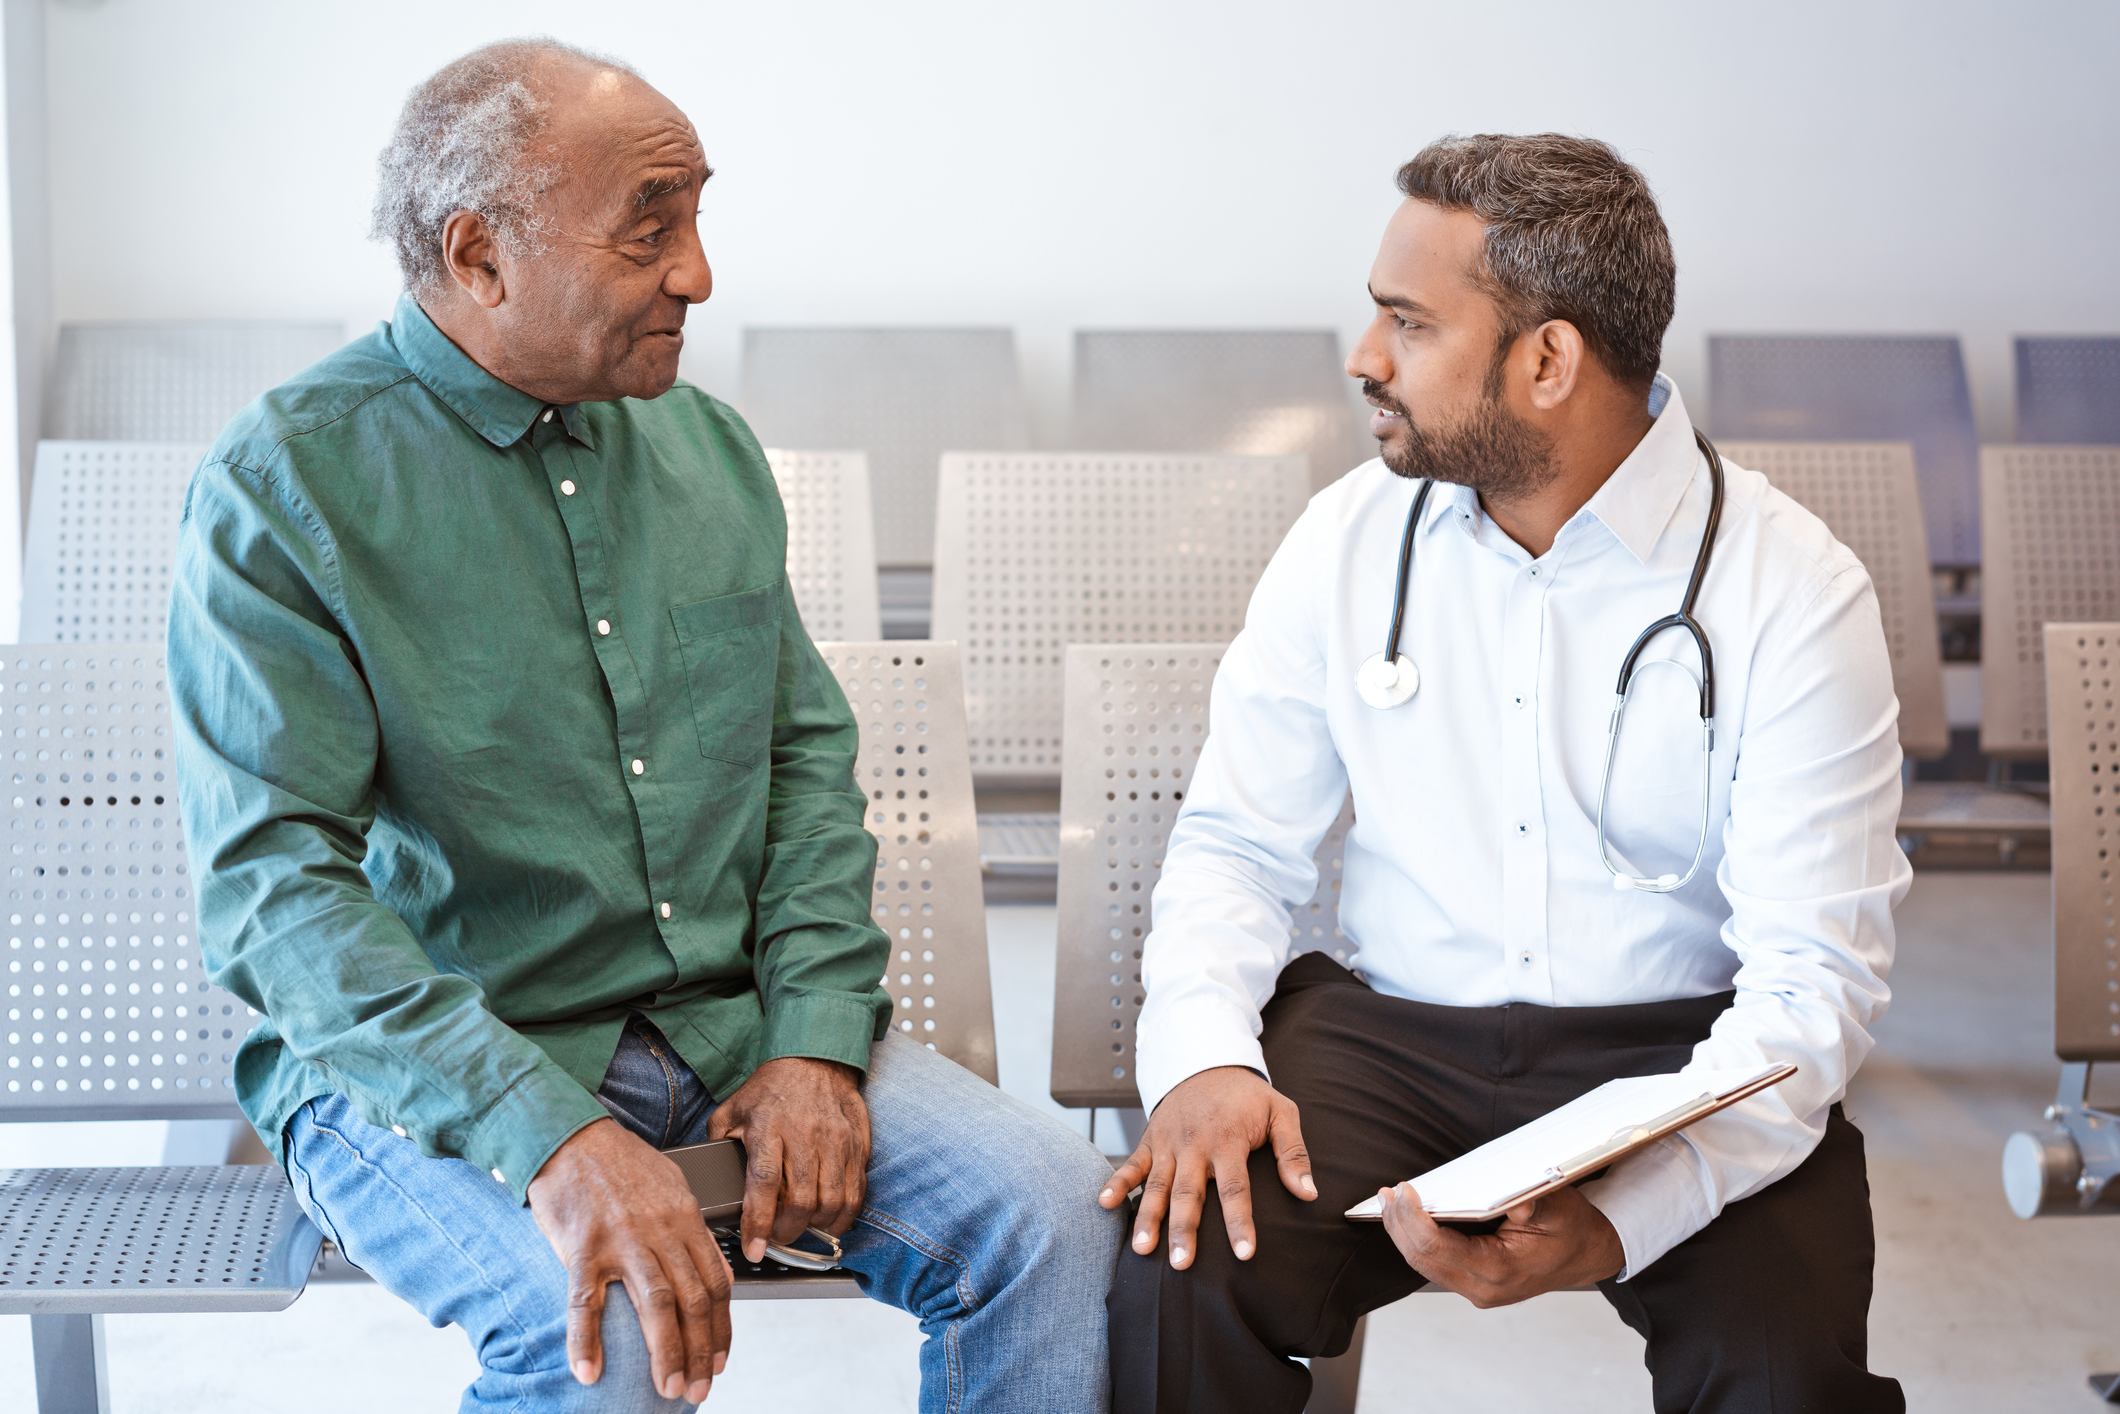 Elderly African American man has conversation with his younger physician